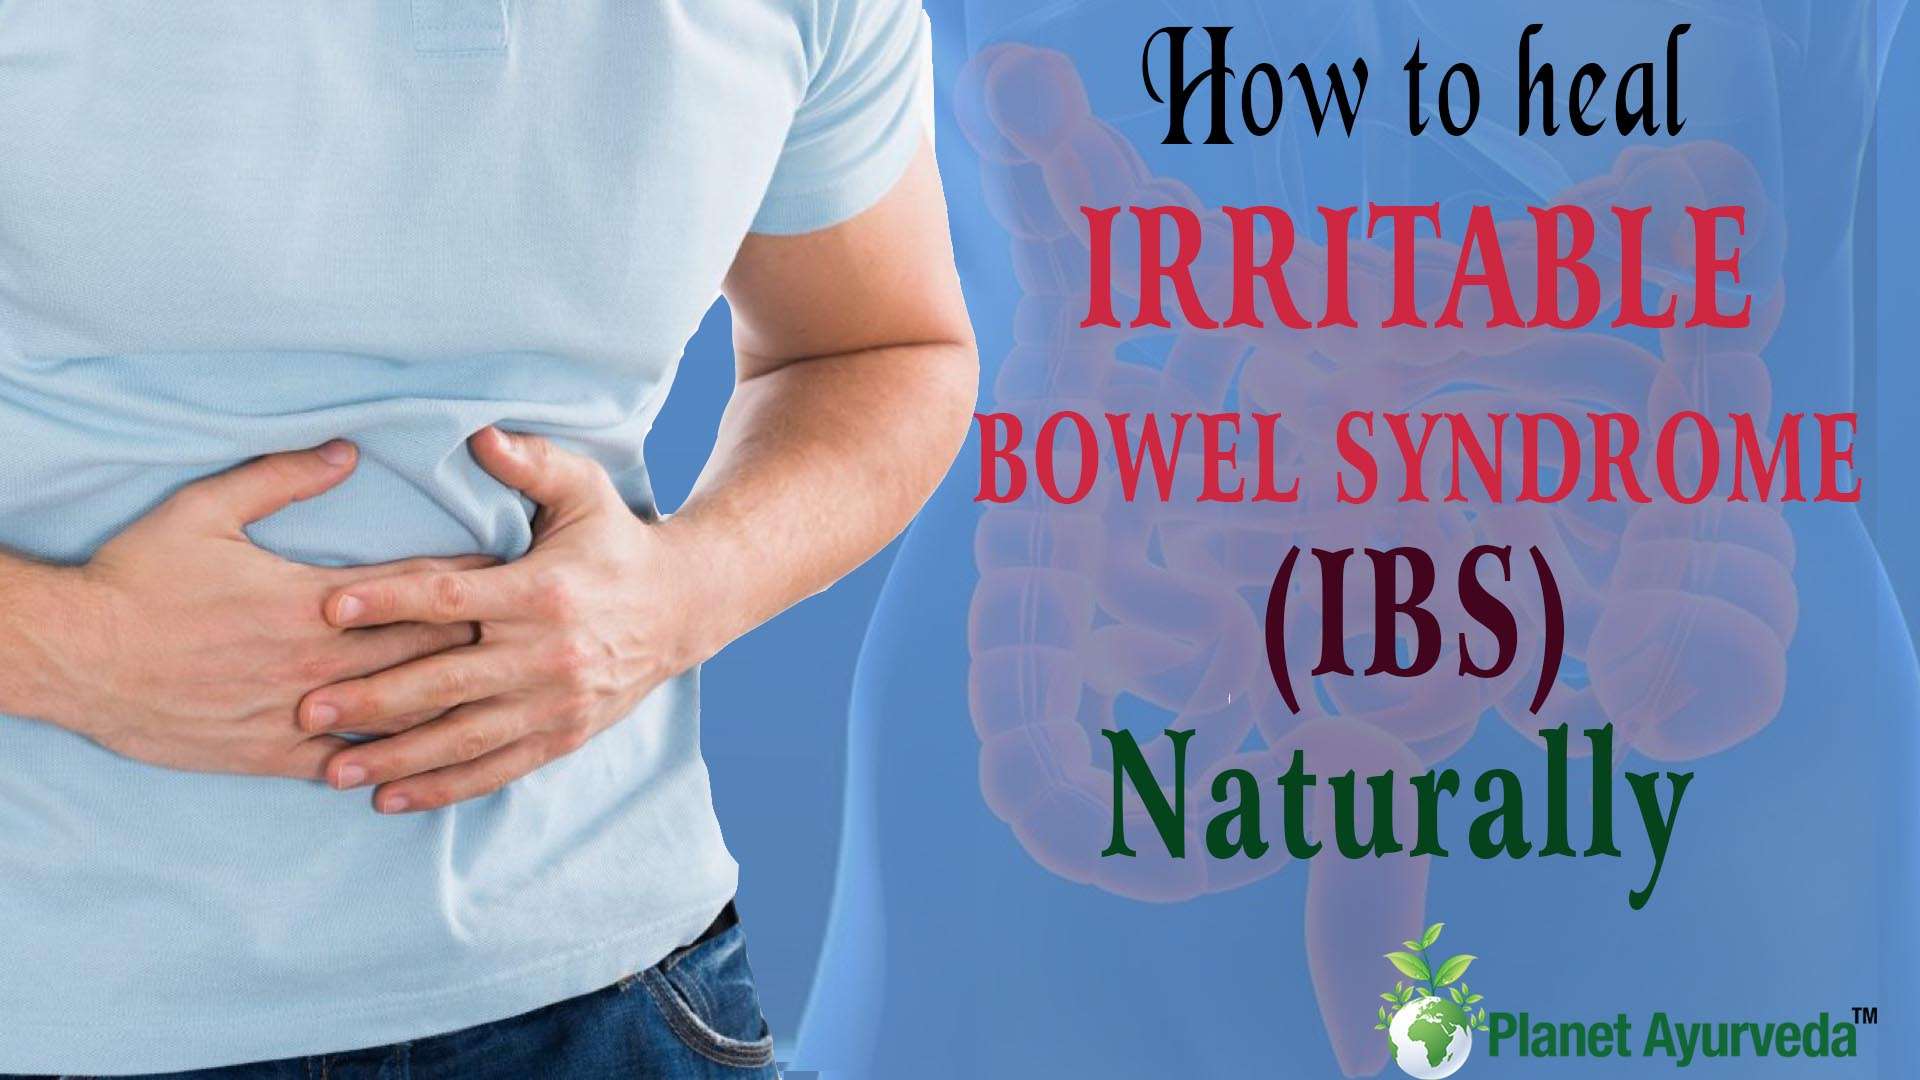 How to Heal Irritable Bowel Syndrome Naturally